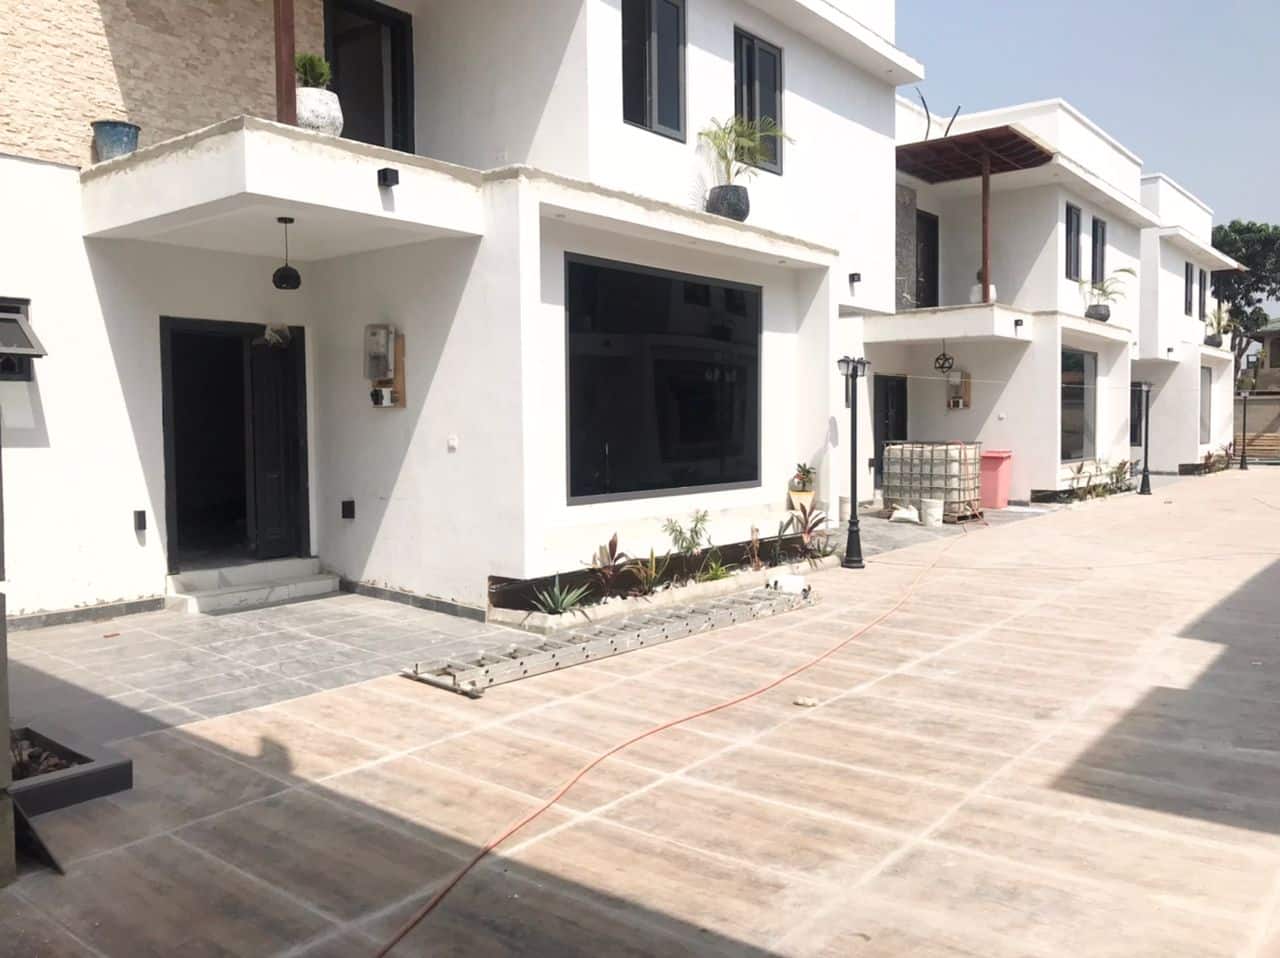 A Spintex 4 Bedroom House For Sale